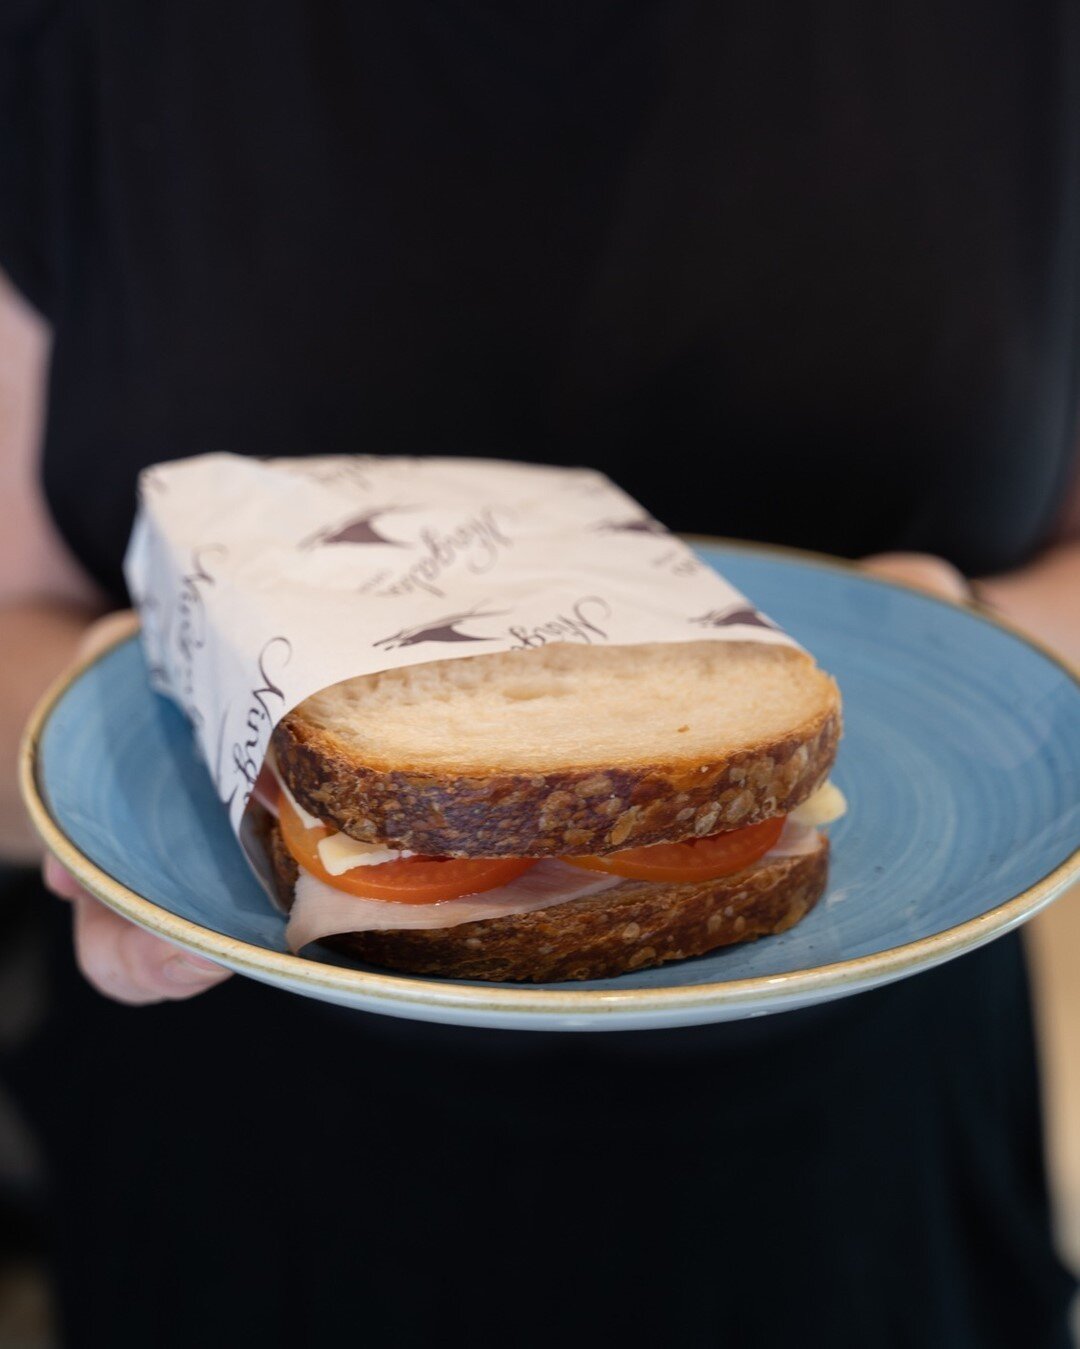 Always on the go &ndash; especially around lunch? No dramas, stop by Charmed by Redfern and pick something up. Get a toastie for the road, or try one of our lunch options in compostable containers. We recommend the Salmon &amp; Soba Noodle Salad or S